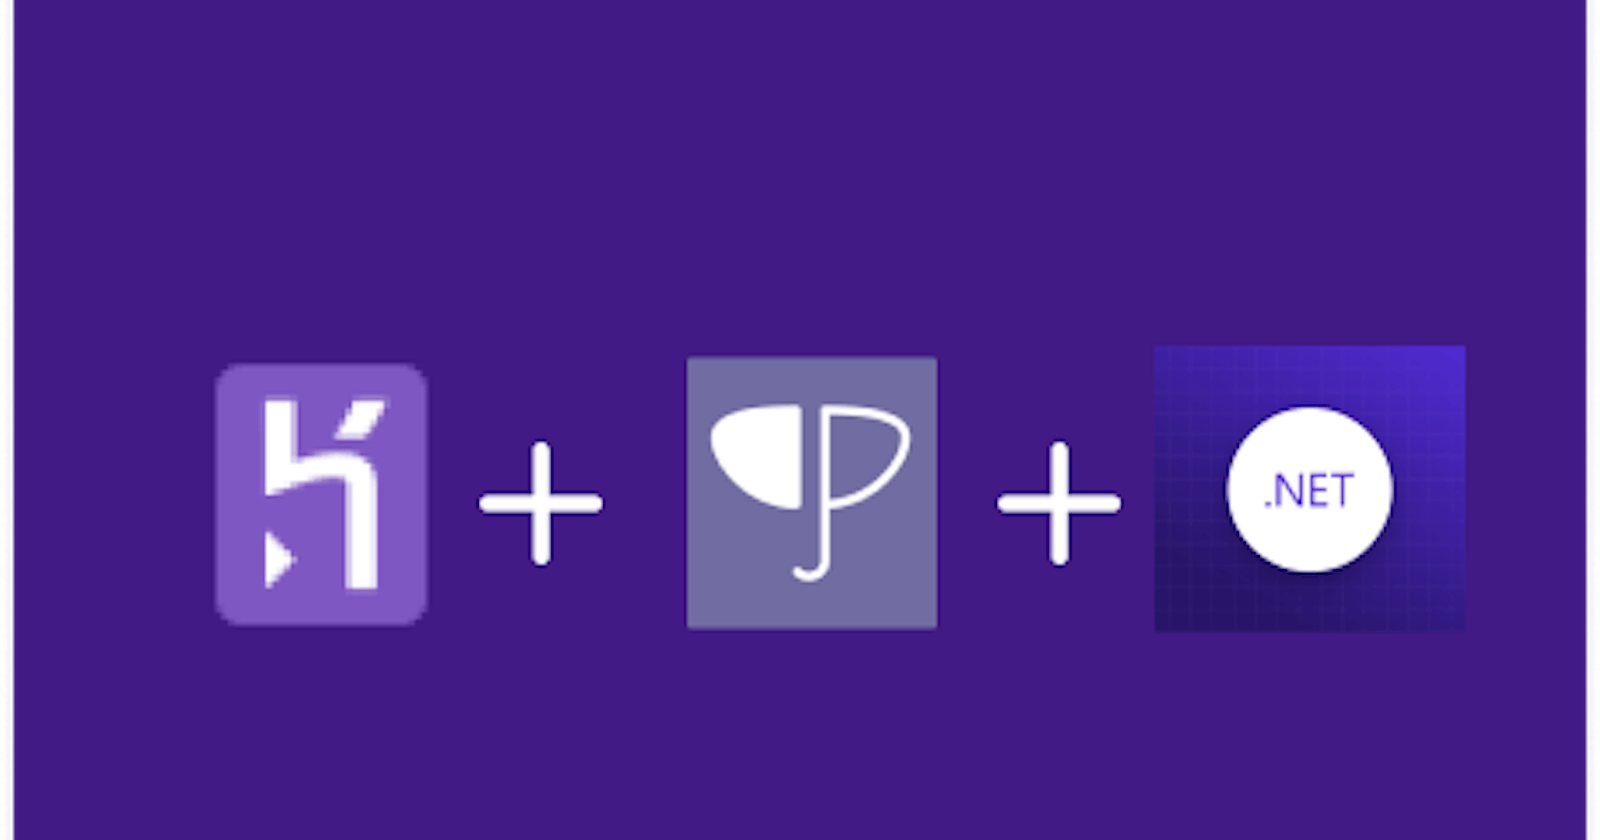 How to Connect and Deploy a .Net Application + Heroku Postgres Db to Heroku